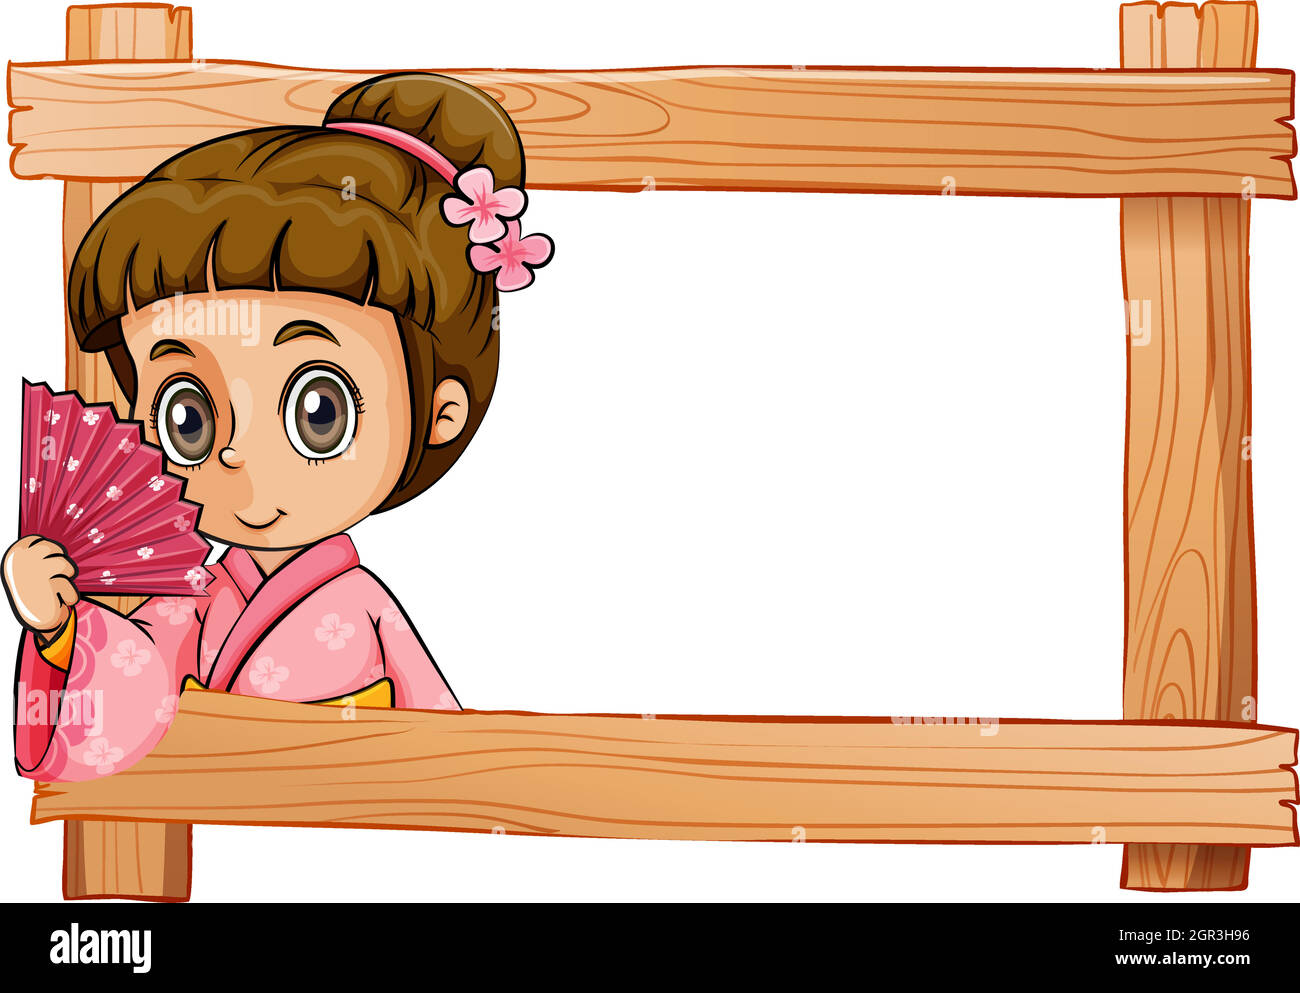 A wooden frame with a girl Stock Vector